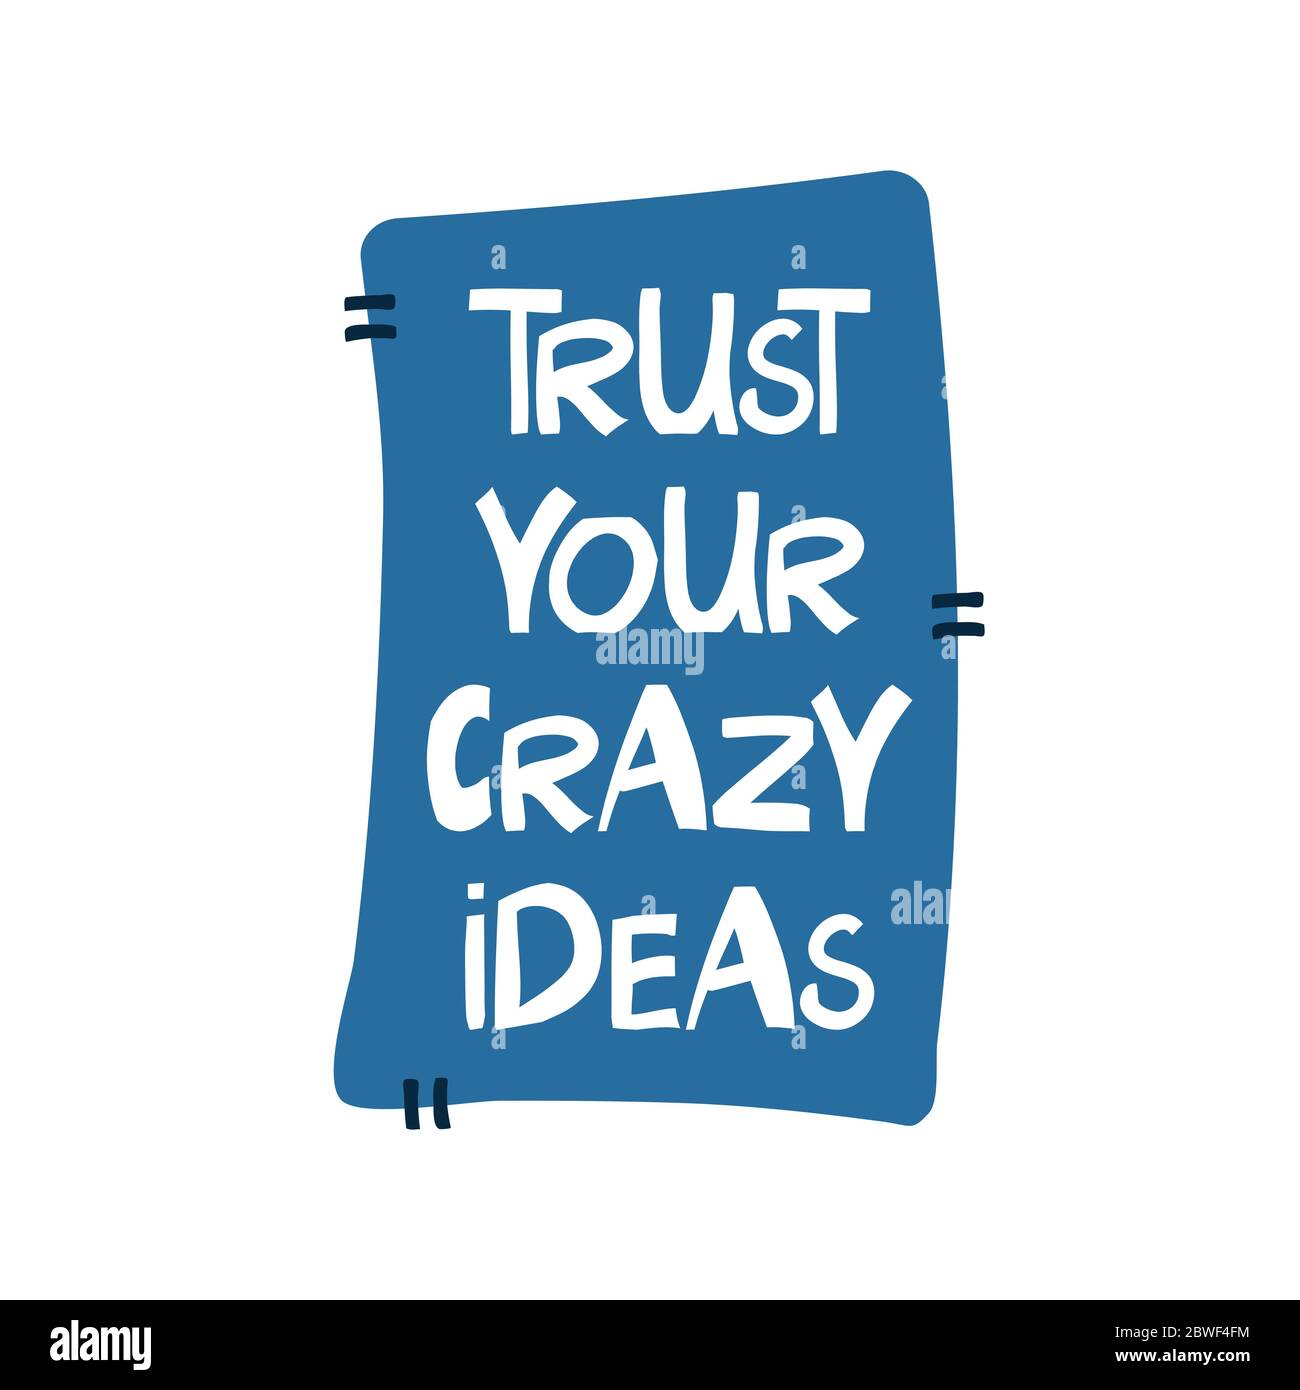 Trust your crazy ideas. Motivation quote. Cute hand drawn white lettering in modern scandinavian style on blue patch. Vector stock illustration. Stock Vector